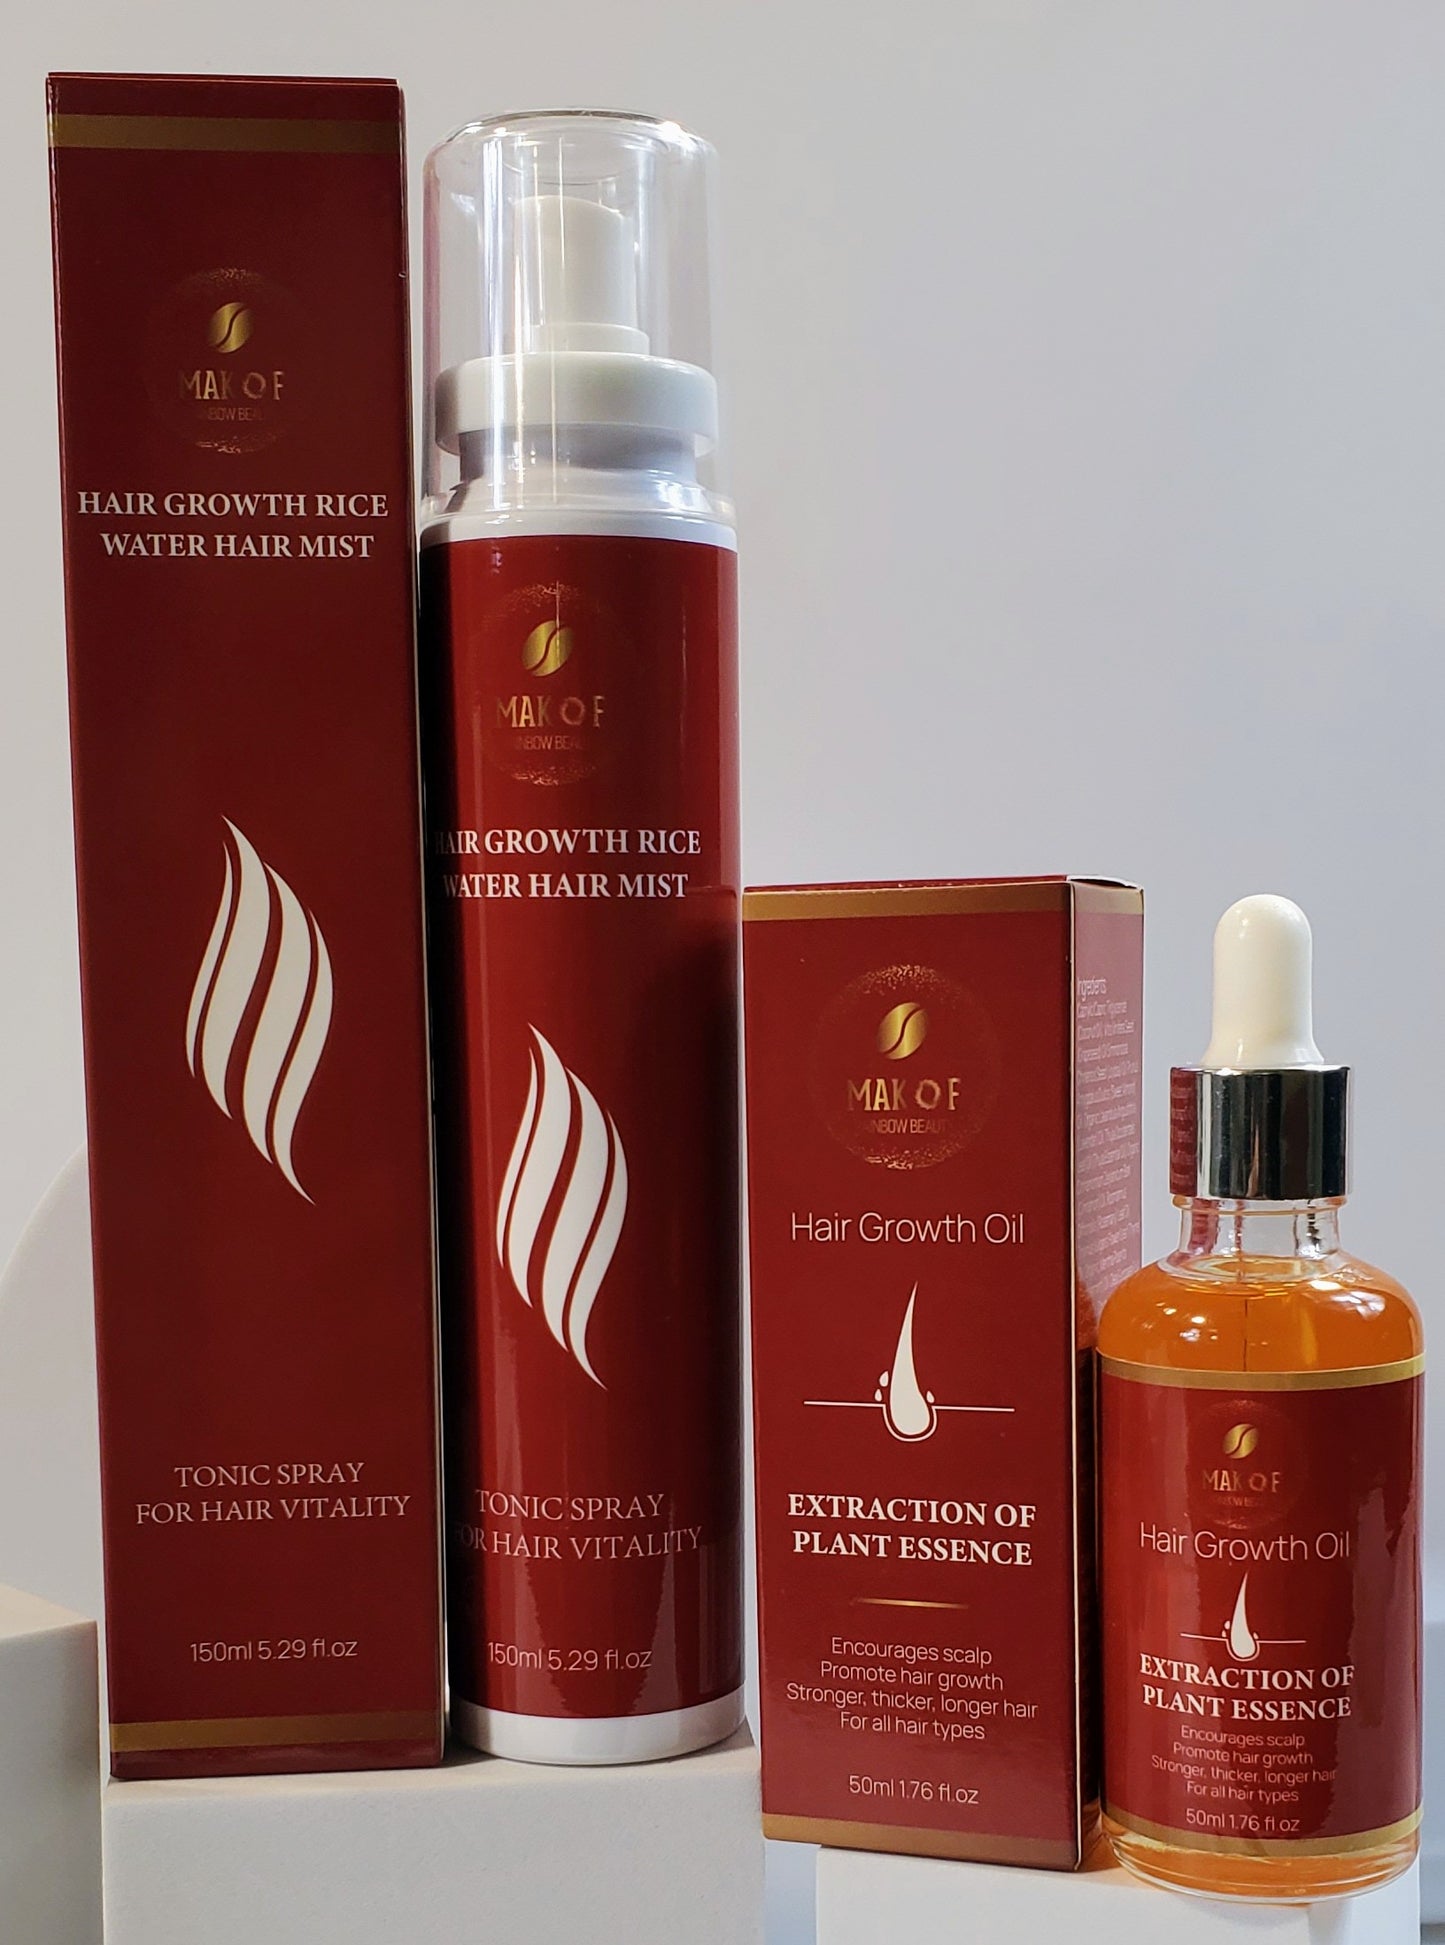 Hair Growth Treatment Set for Dry and Damaged Hair, Rice water spray for growth and moisturizing - hair growth oil for hair regrowth. Silicone and Sulfate Free.